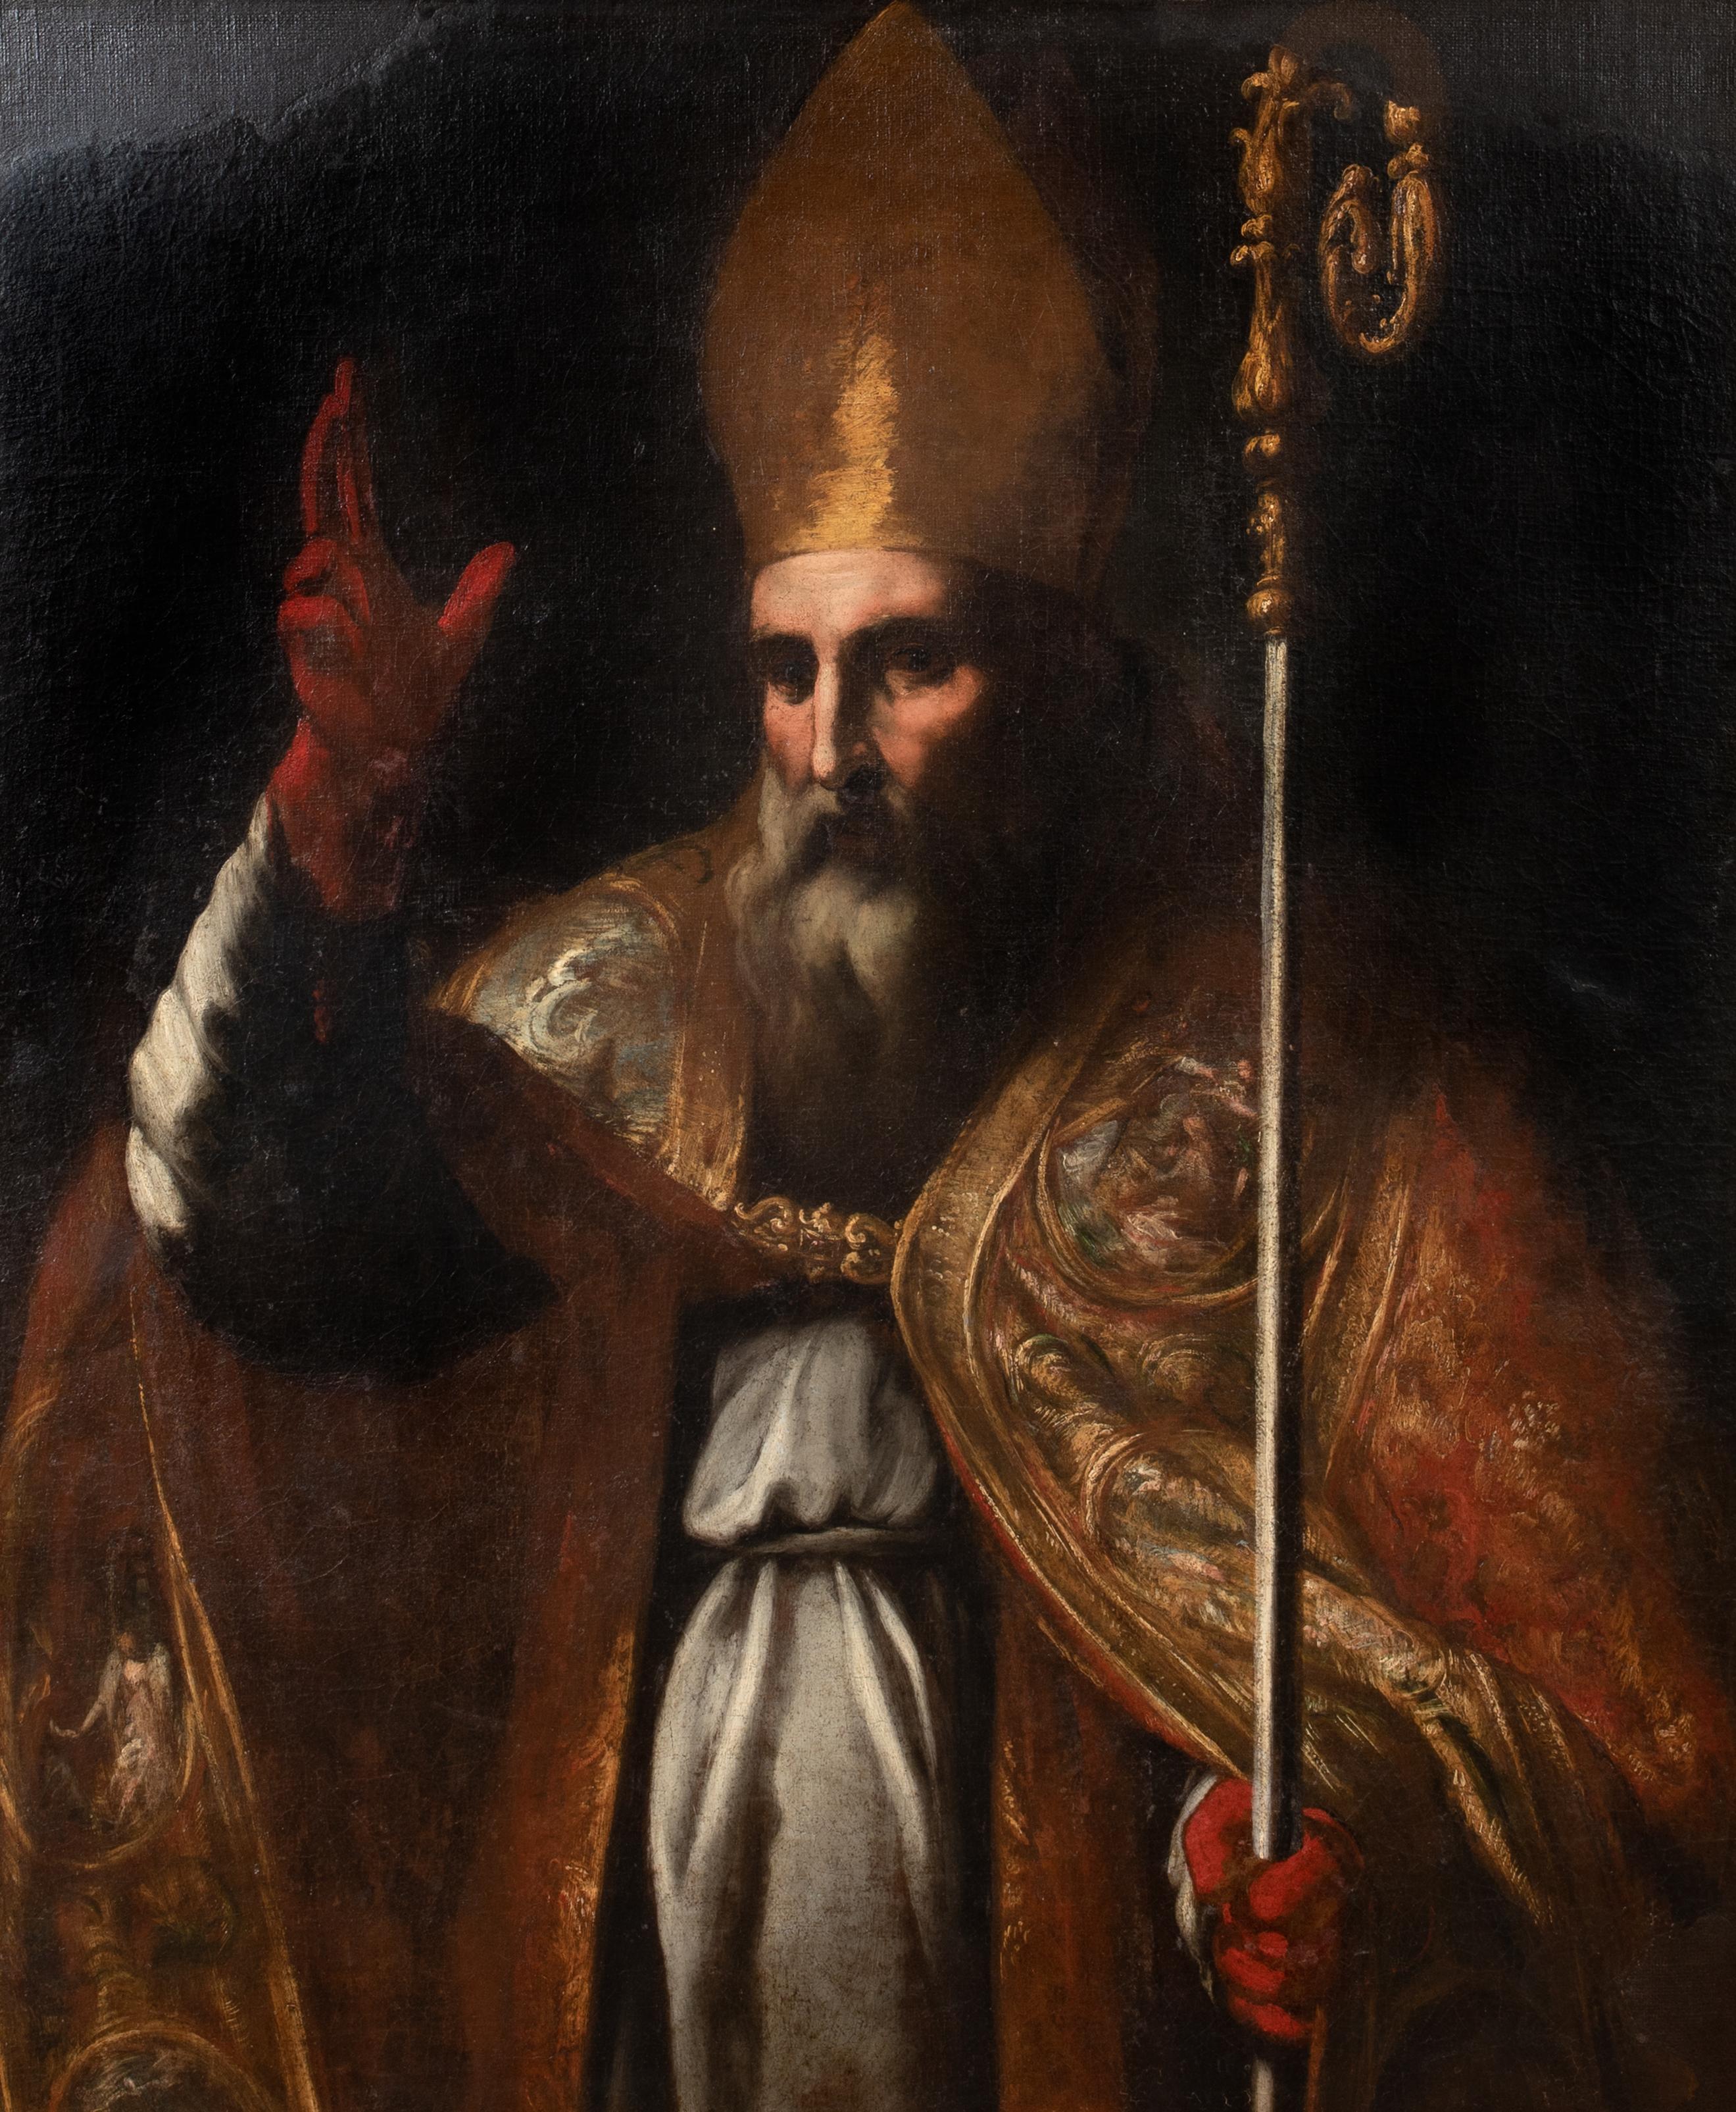 Portrait Of Pope Leo I The Great, Bishop Of Rome (400-461), 17th Century

Italian School

Large 17th Century historical portrait of Pope Leo I, Leo The Great, Bishop Of Rome, oil on canvas. Superb quality and condition rare history portrait of the